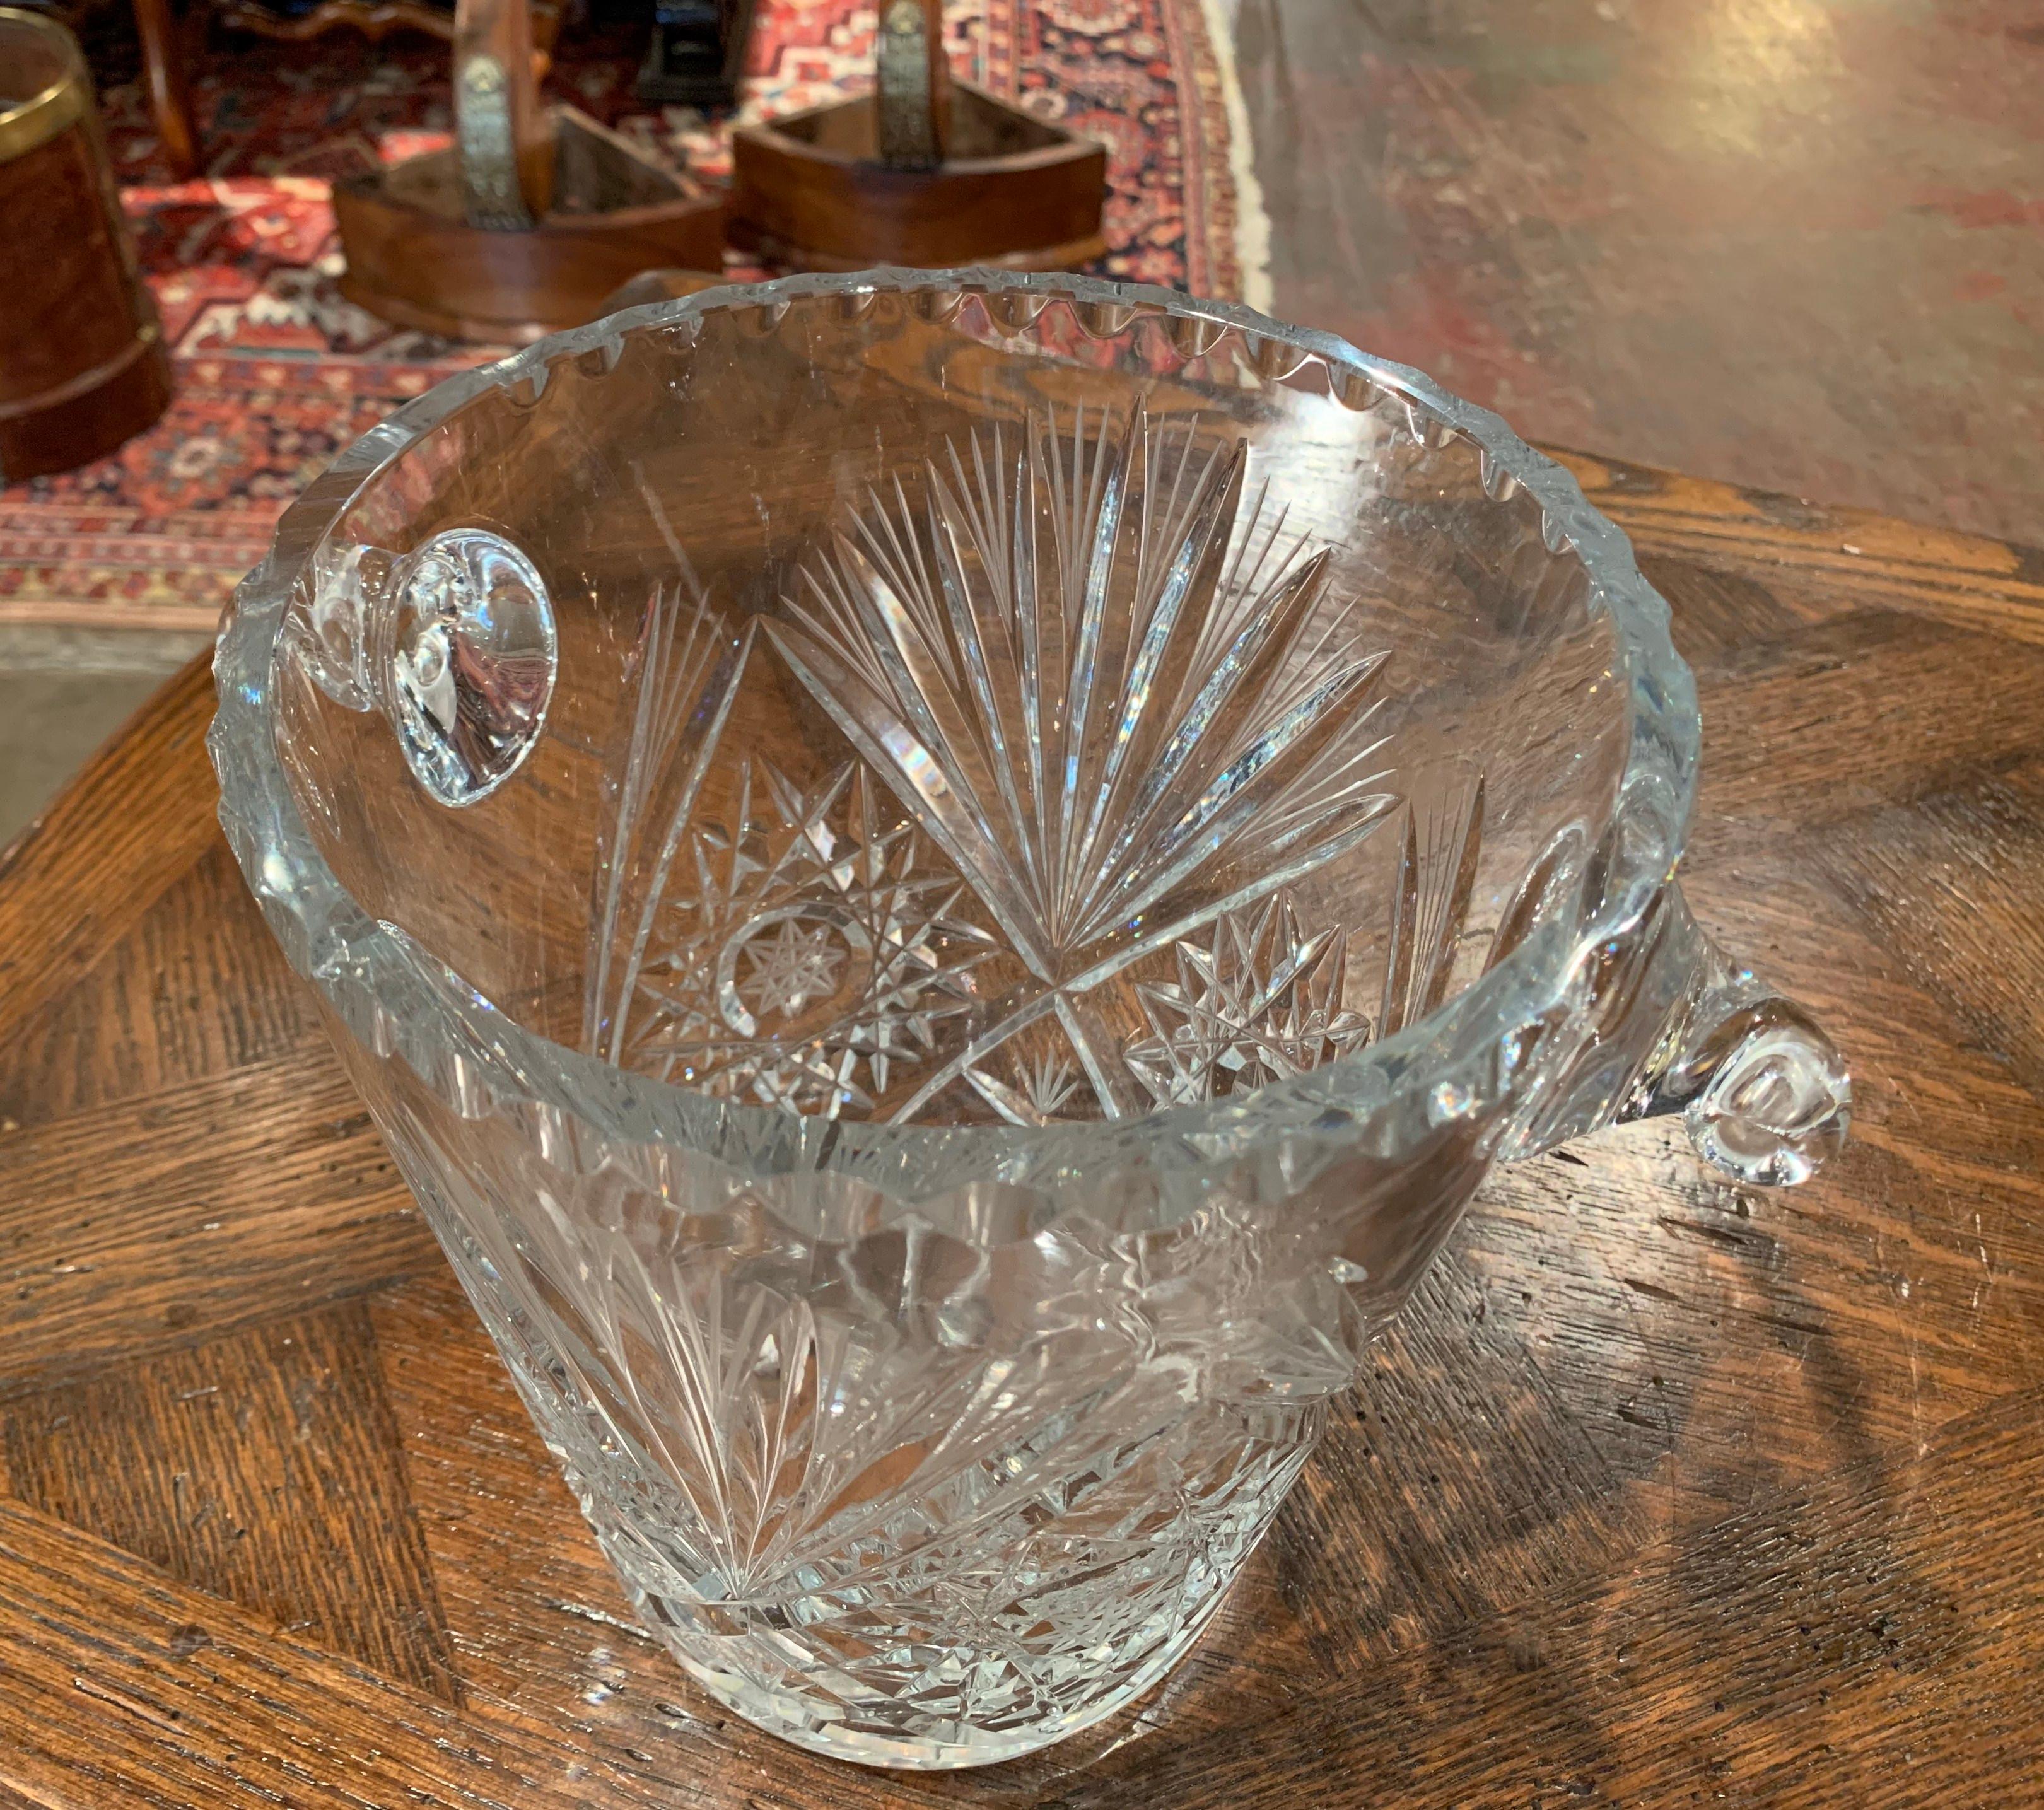 Vintage French Cut Crystal Ice Bucket with Foliage Decor and Handles 2